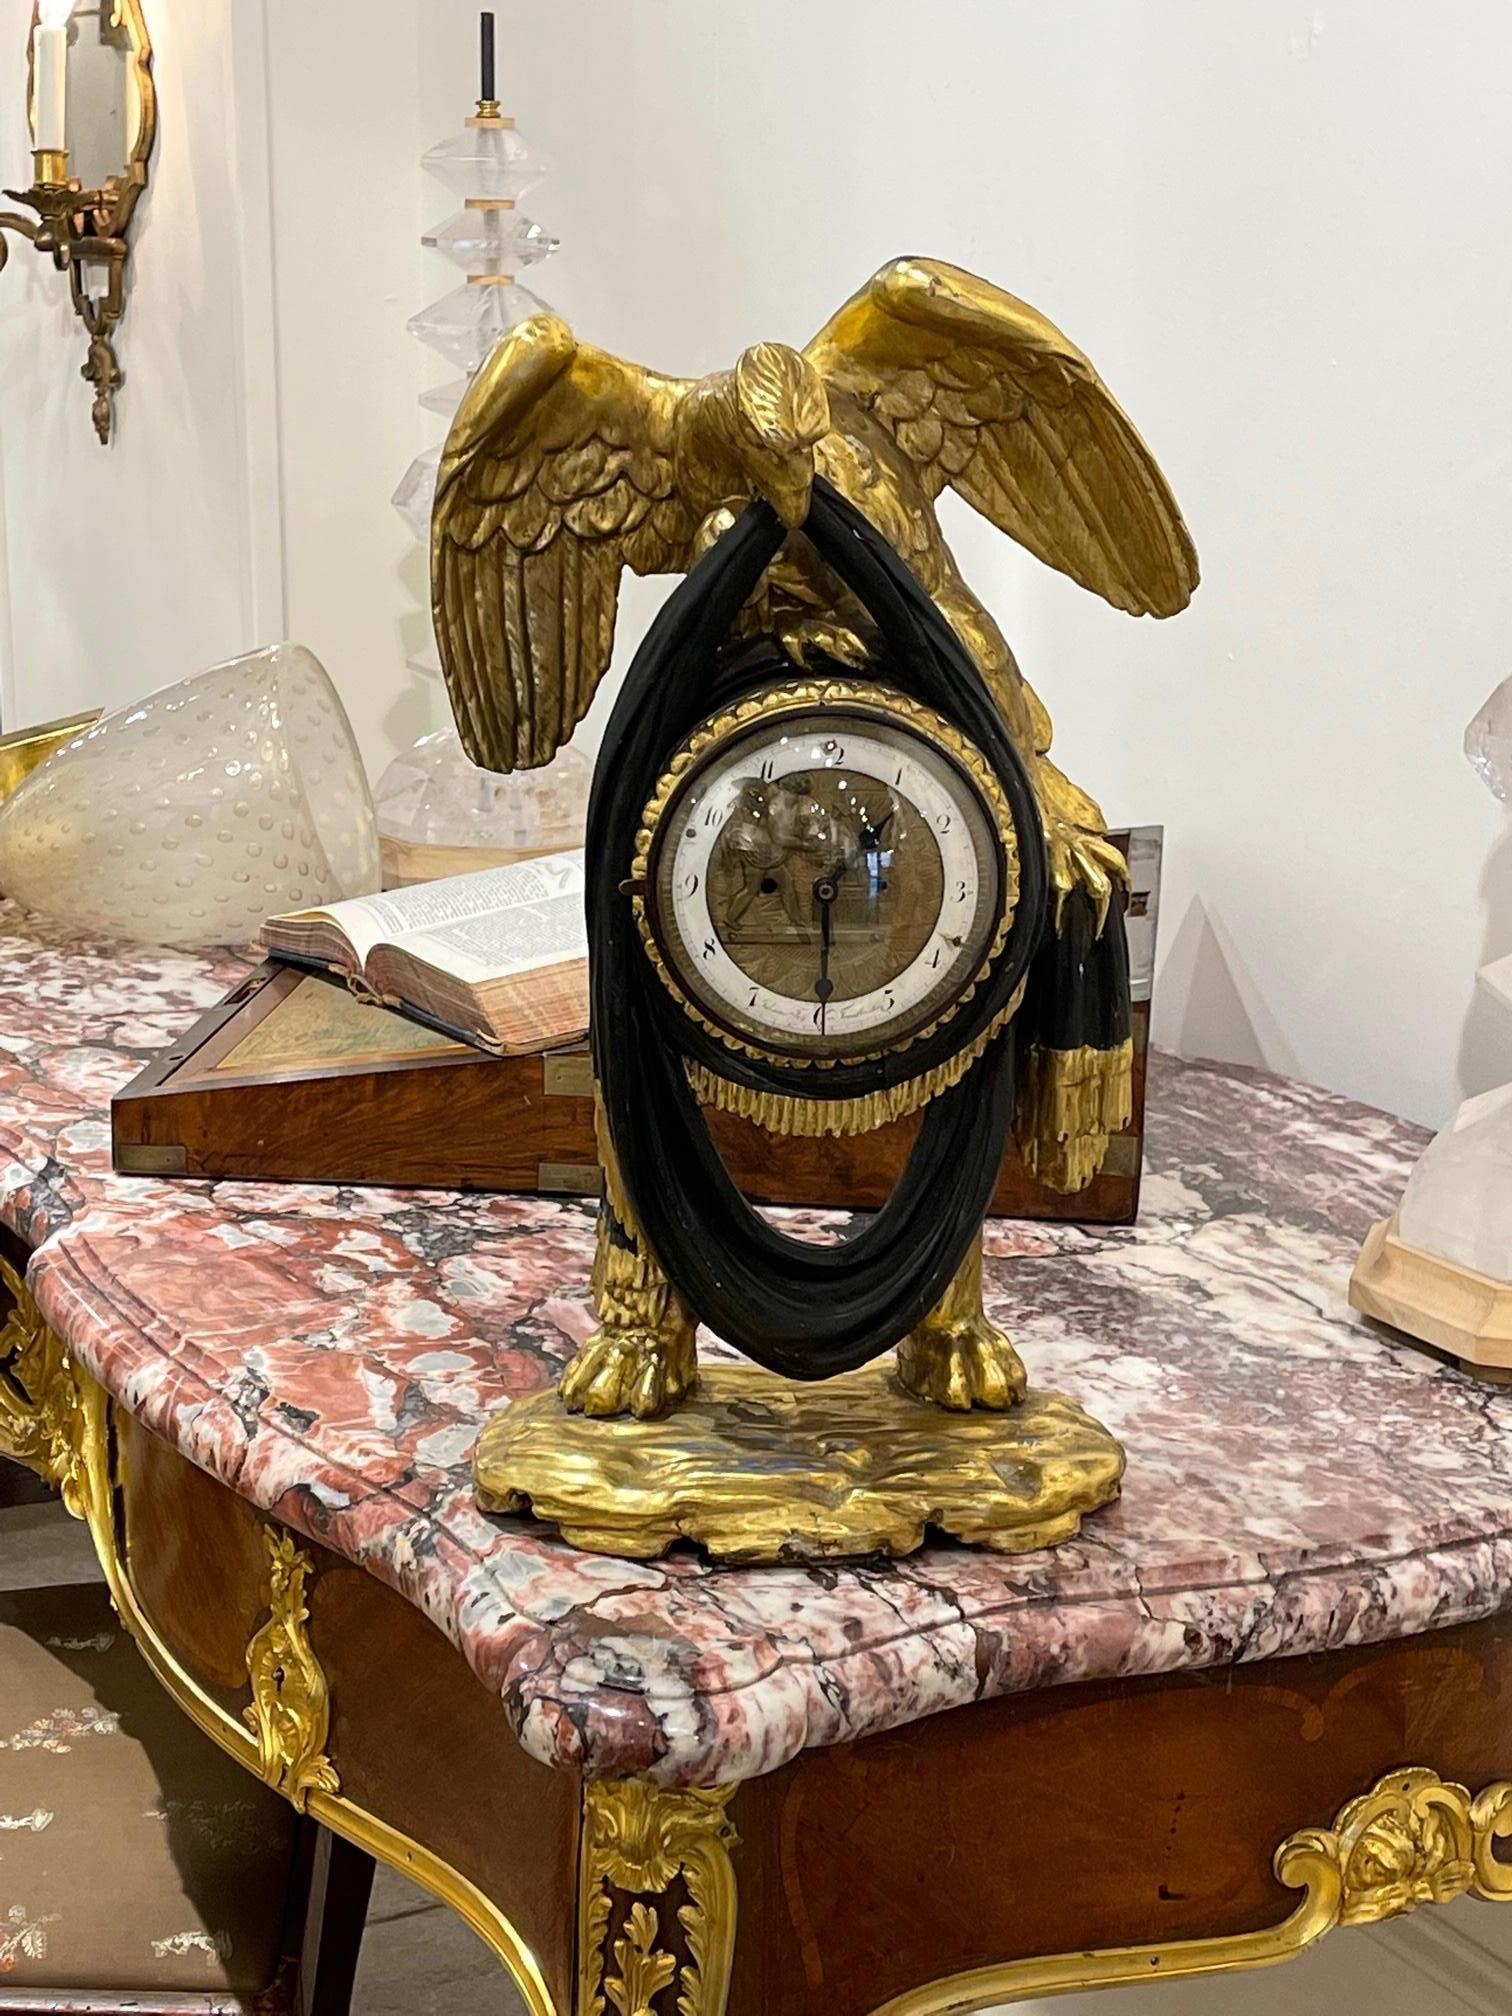 Very fine carved giltwood eagle form mantel clock. Exceptional carving and take notice of the elaborate face of the clock featuring decorative numerals and a cherub. An exceptional piece for your mantel!